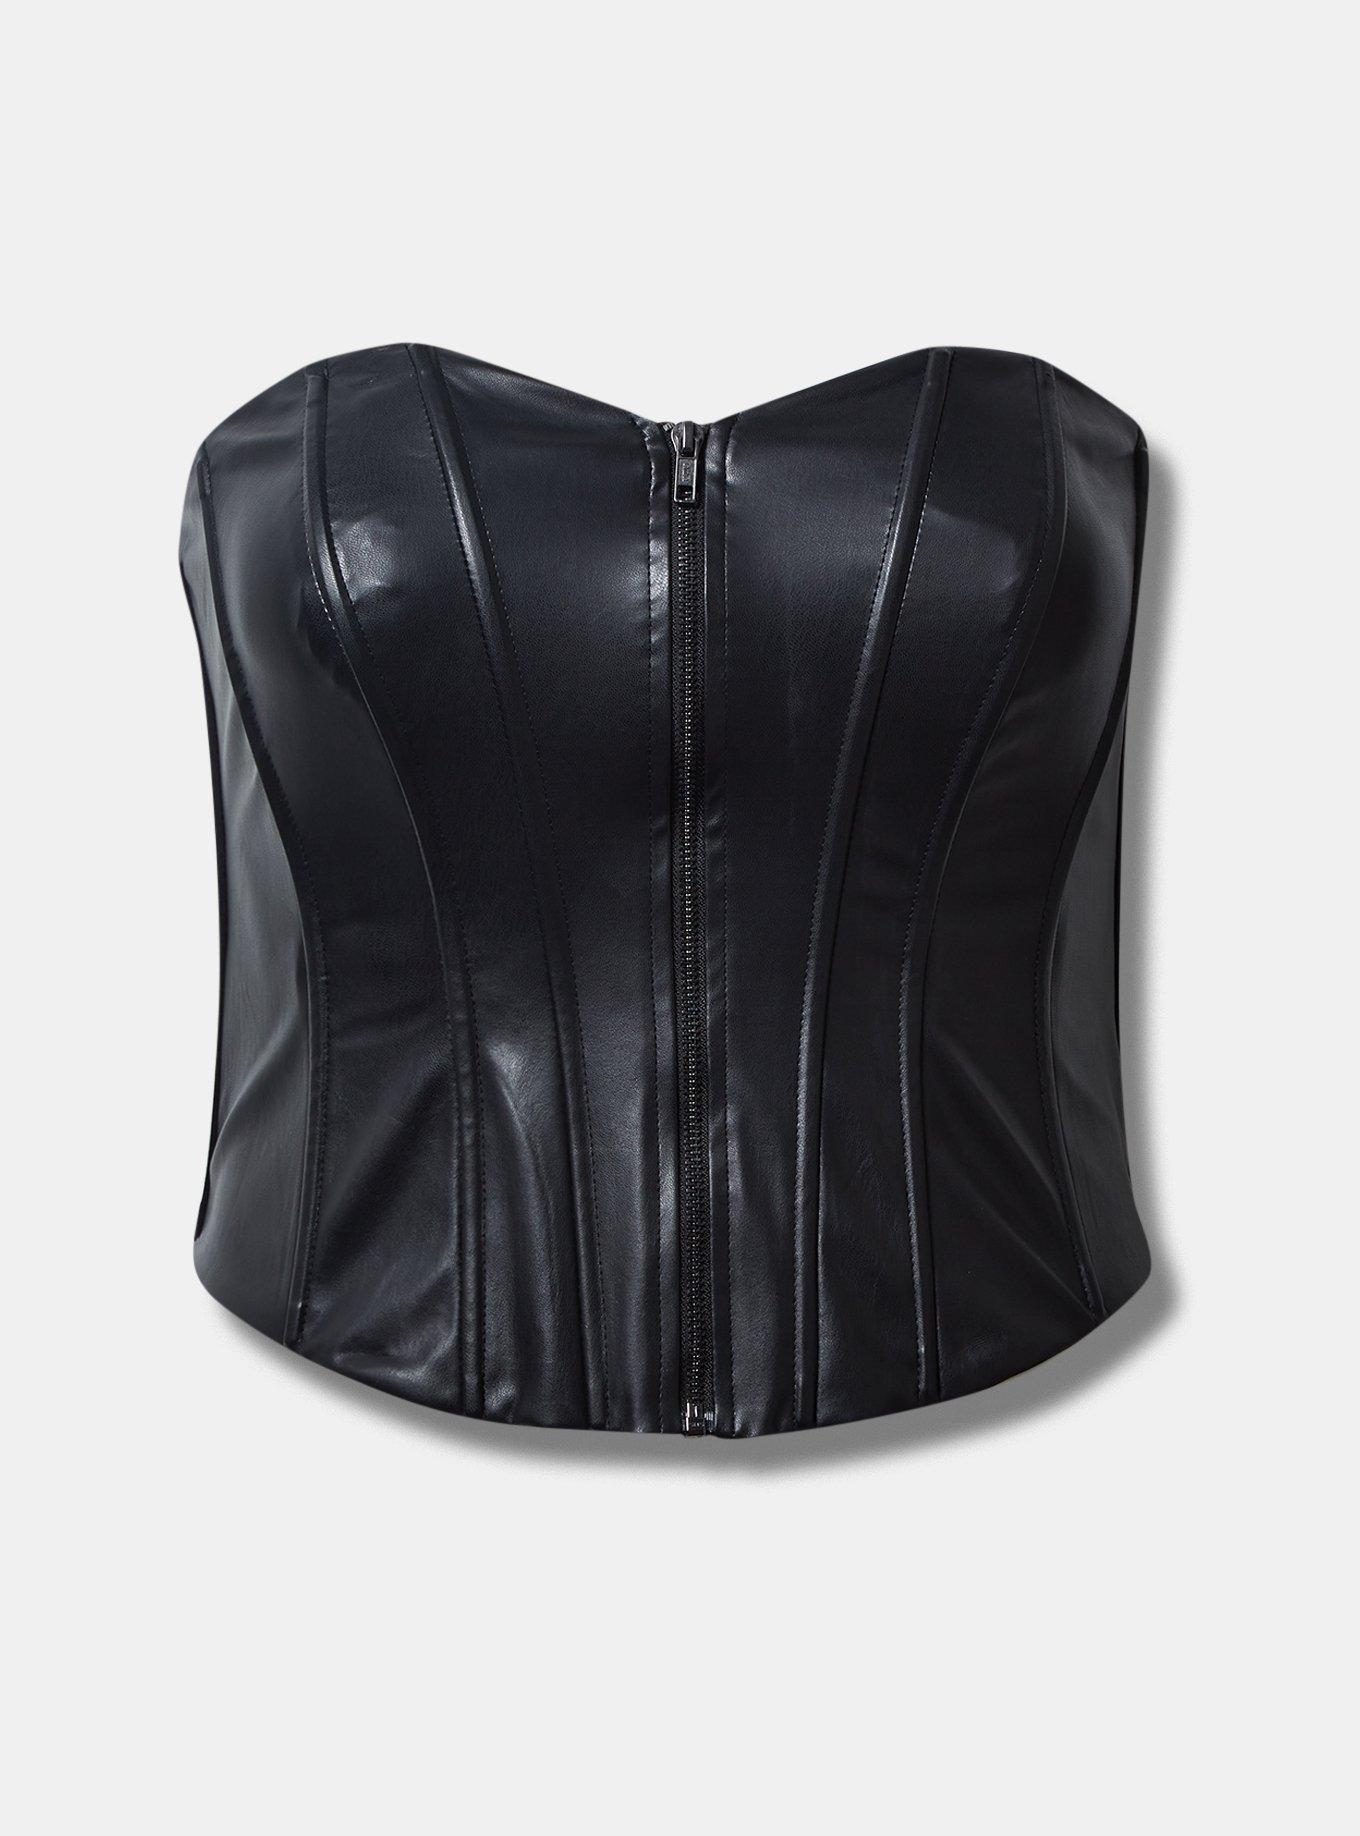 I'm a 42G and didn't think I could ever wear a corset because of